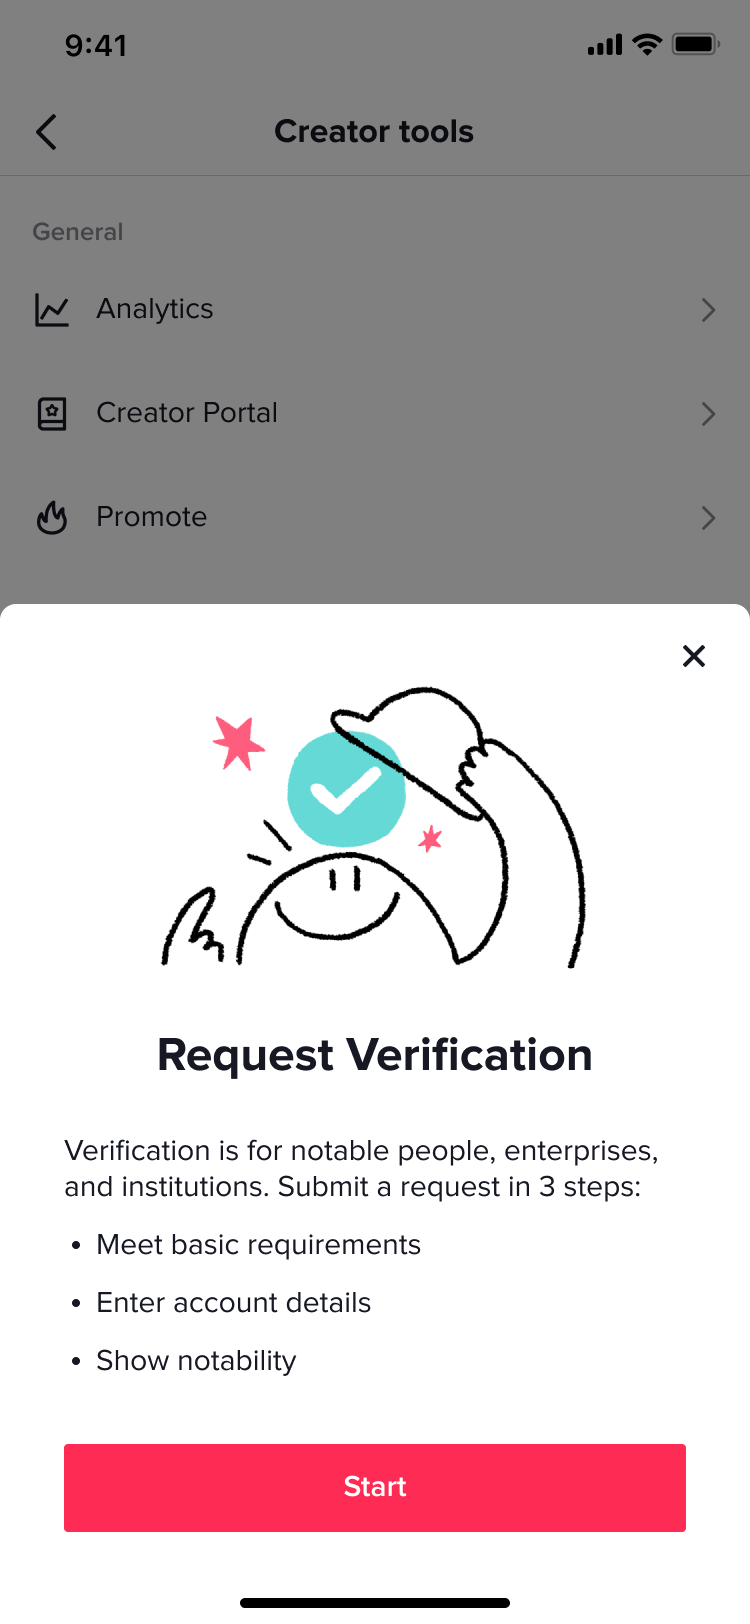 TikTok users can now request for verification in the app